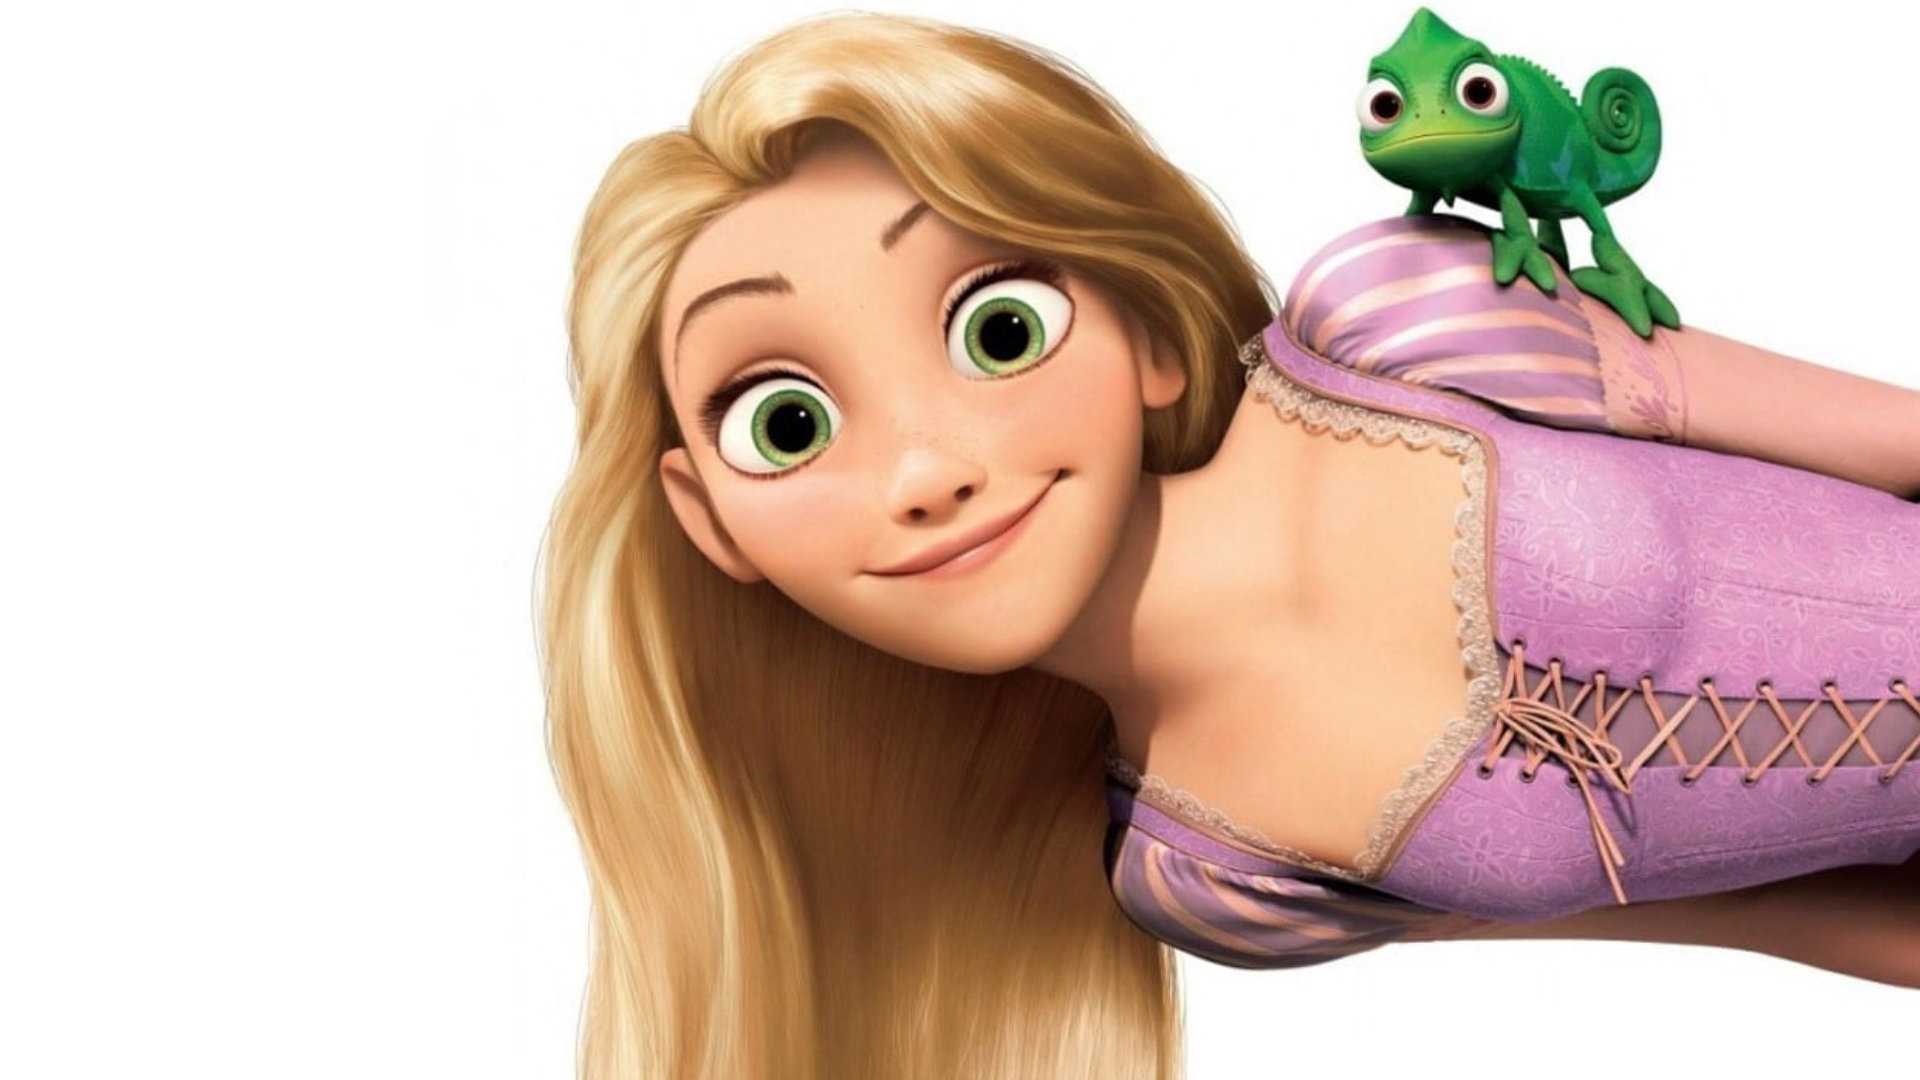 Disney reportedly working on live action remake of Tangled - Stageberry